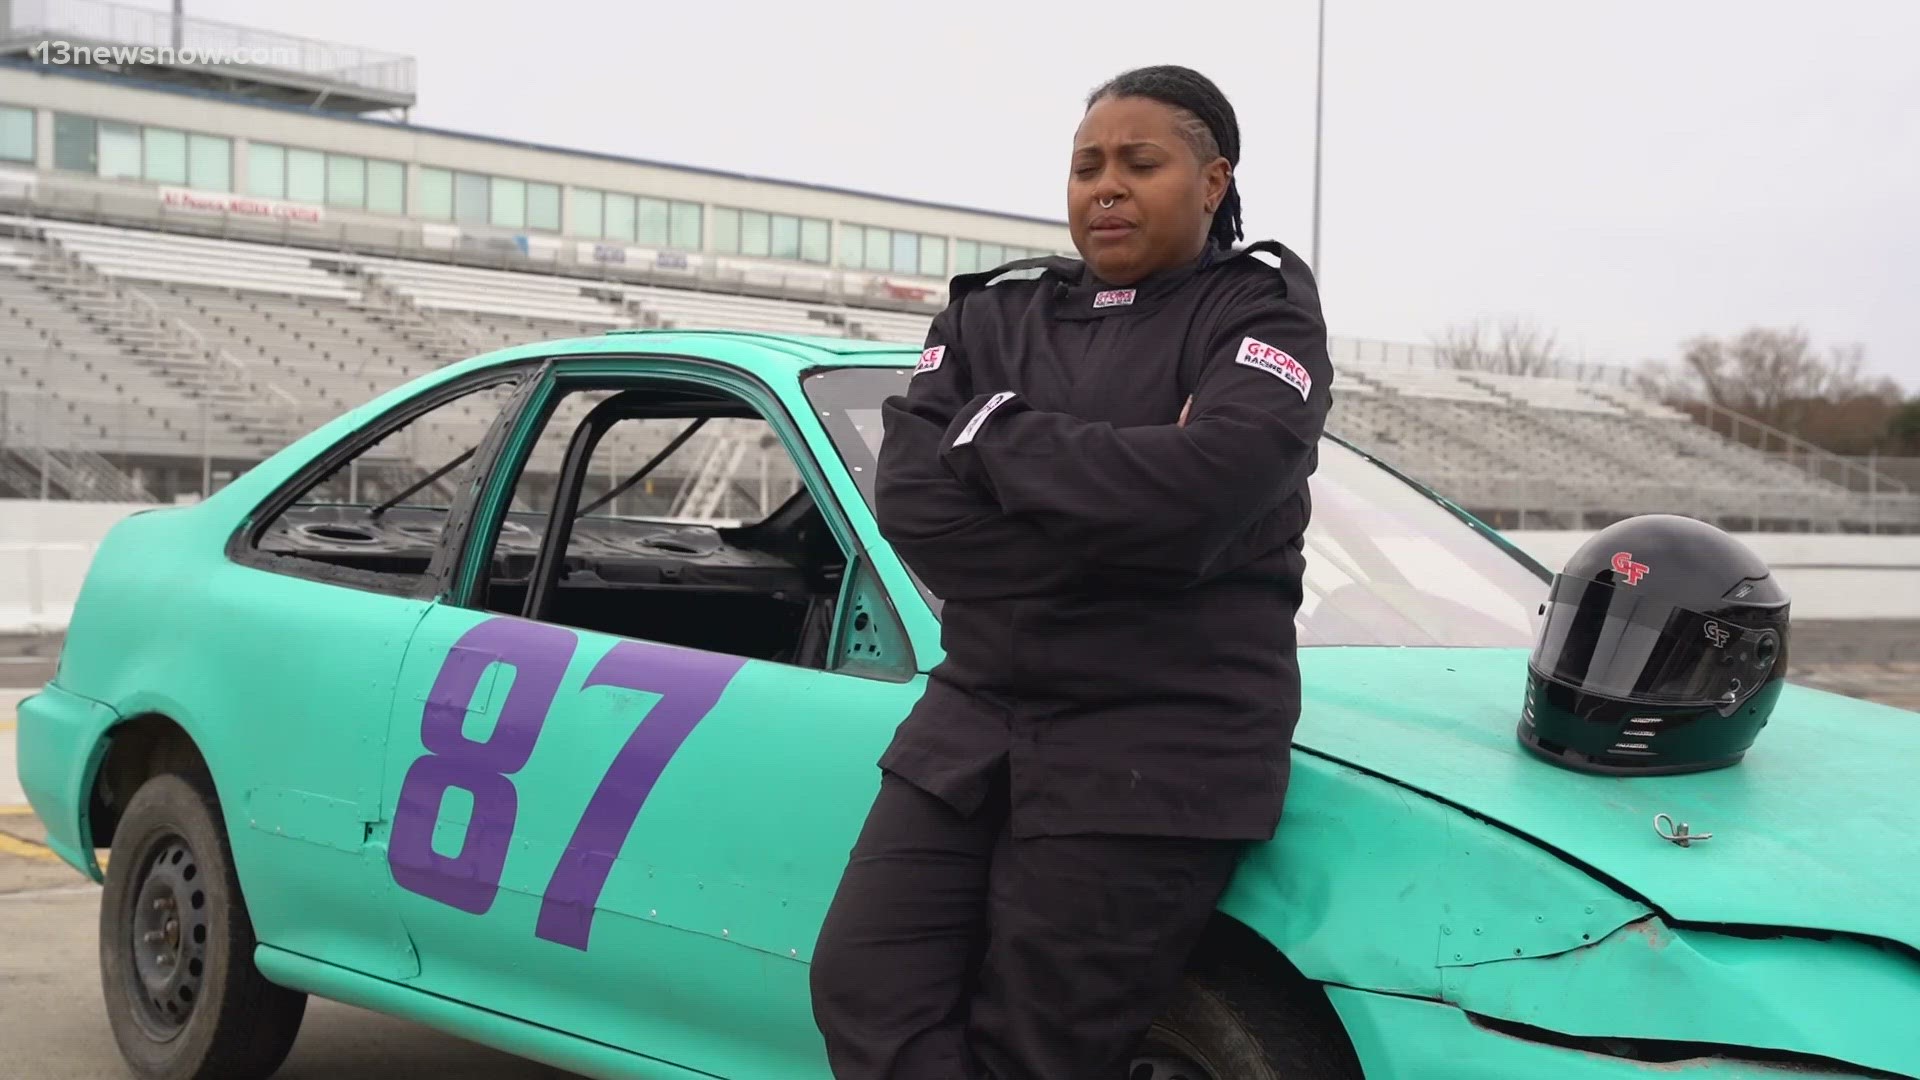 Last year, Tiffany Richardson-Harrell was a pit crew member at Langley Speedway, longing to get behind the wheel. Now, her first race is set for April 6.